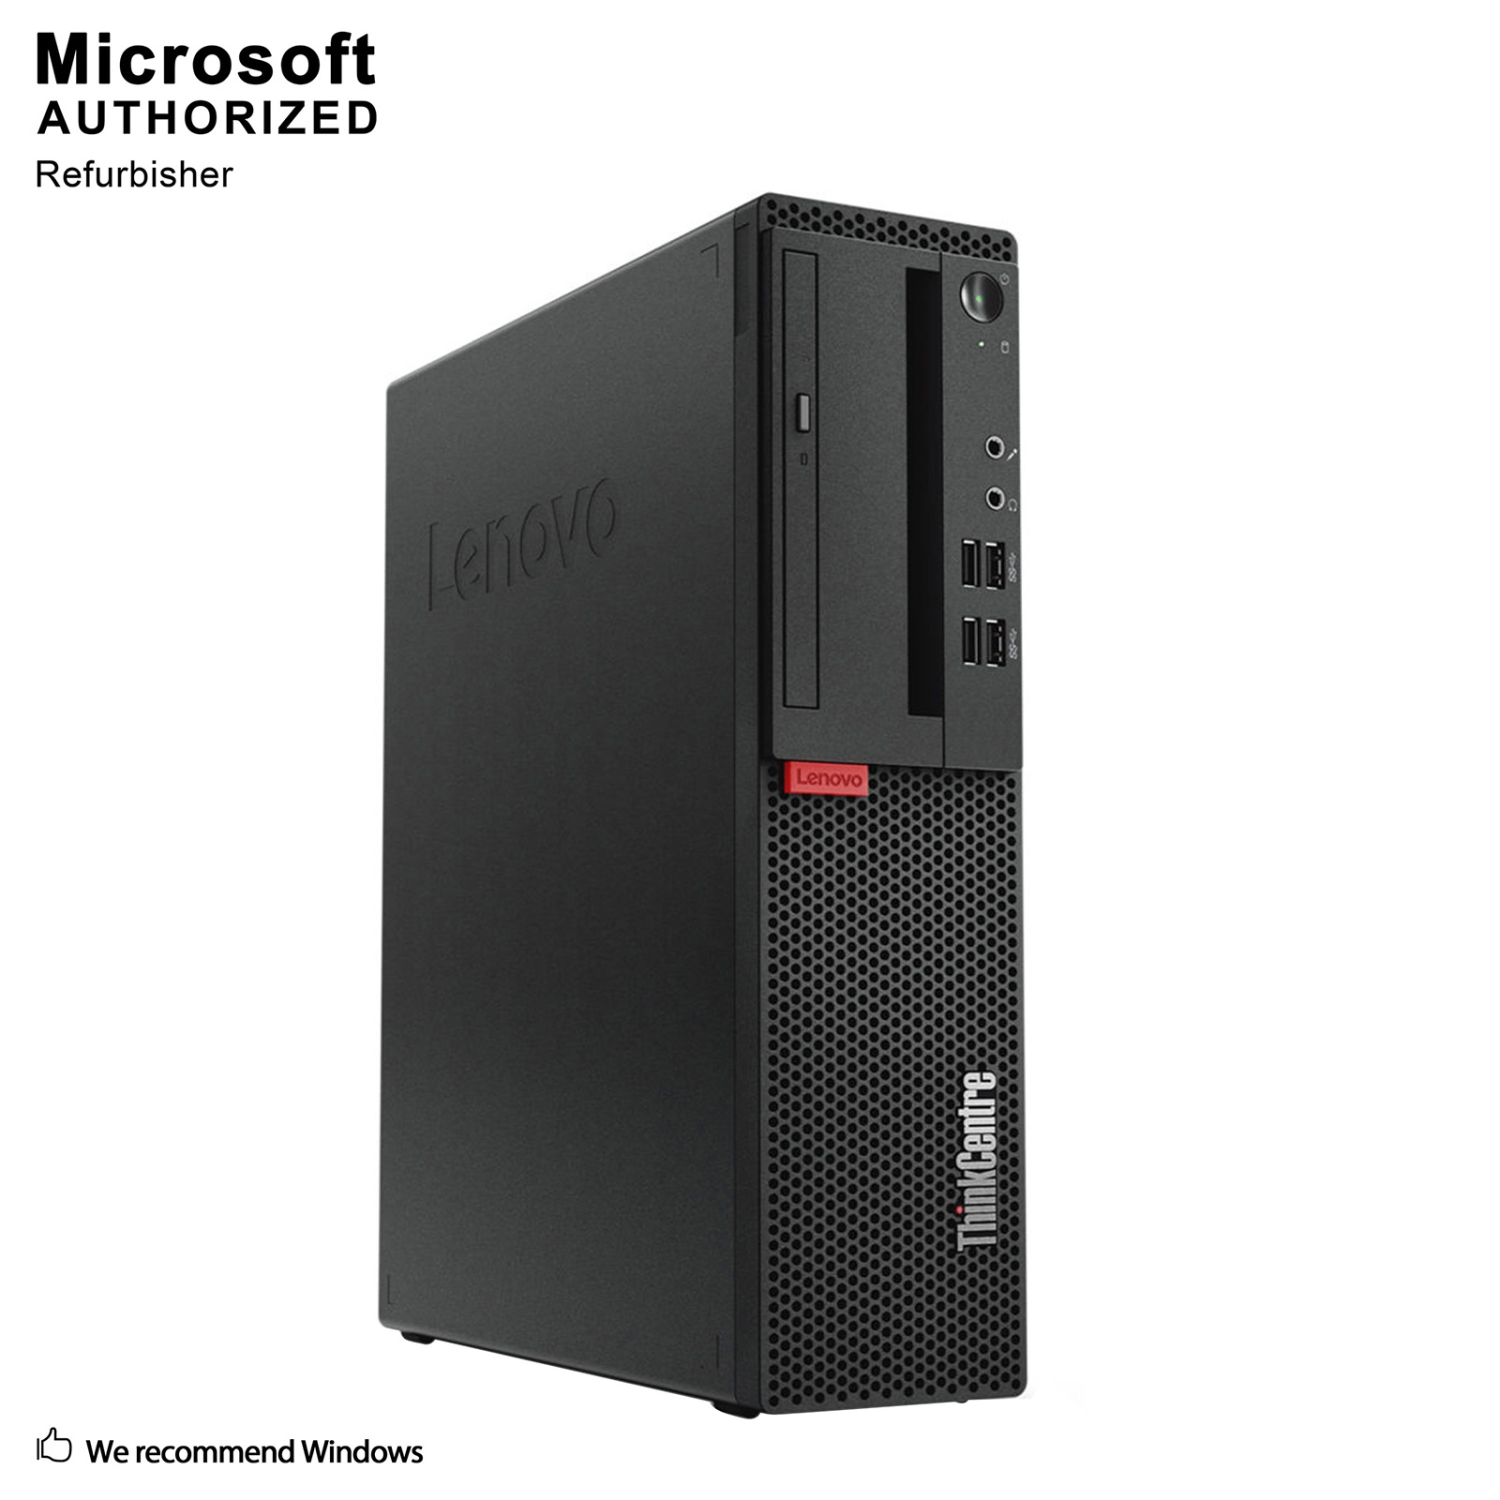 Refurbished (Good) - Lenovo ThinkCentre M910S SFF PC, Intel Core I5-6500 3.2Ghz, 8G DDR4, 1 TB HDD, DVD, 4K Support, Keyboard & Mouse, Win 10 Pro 64-bit (EN/ES/FR)